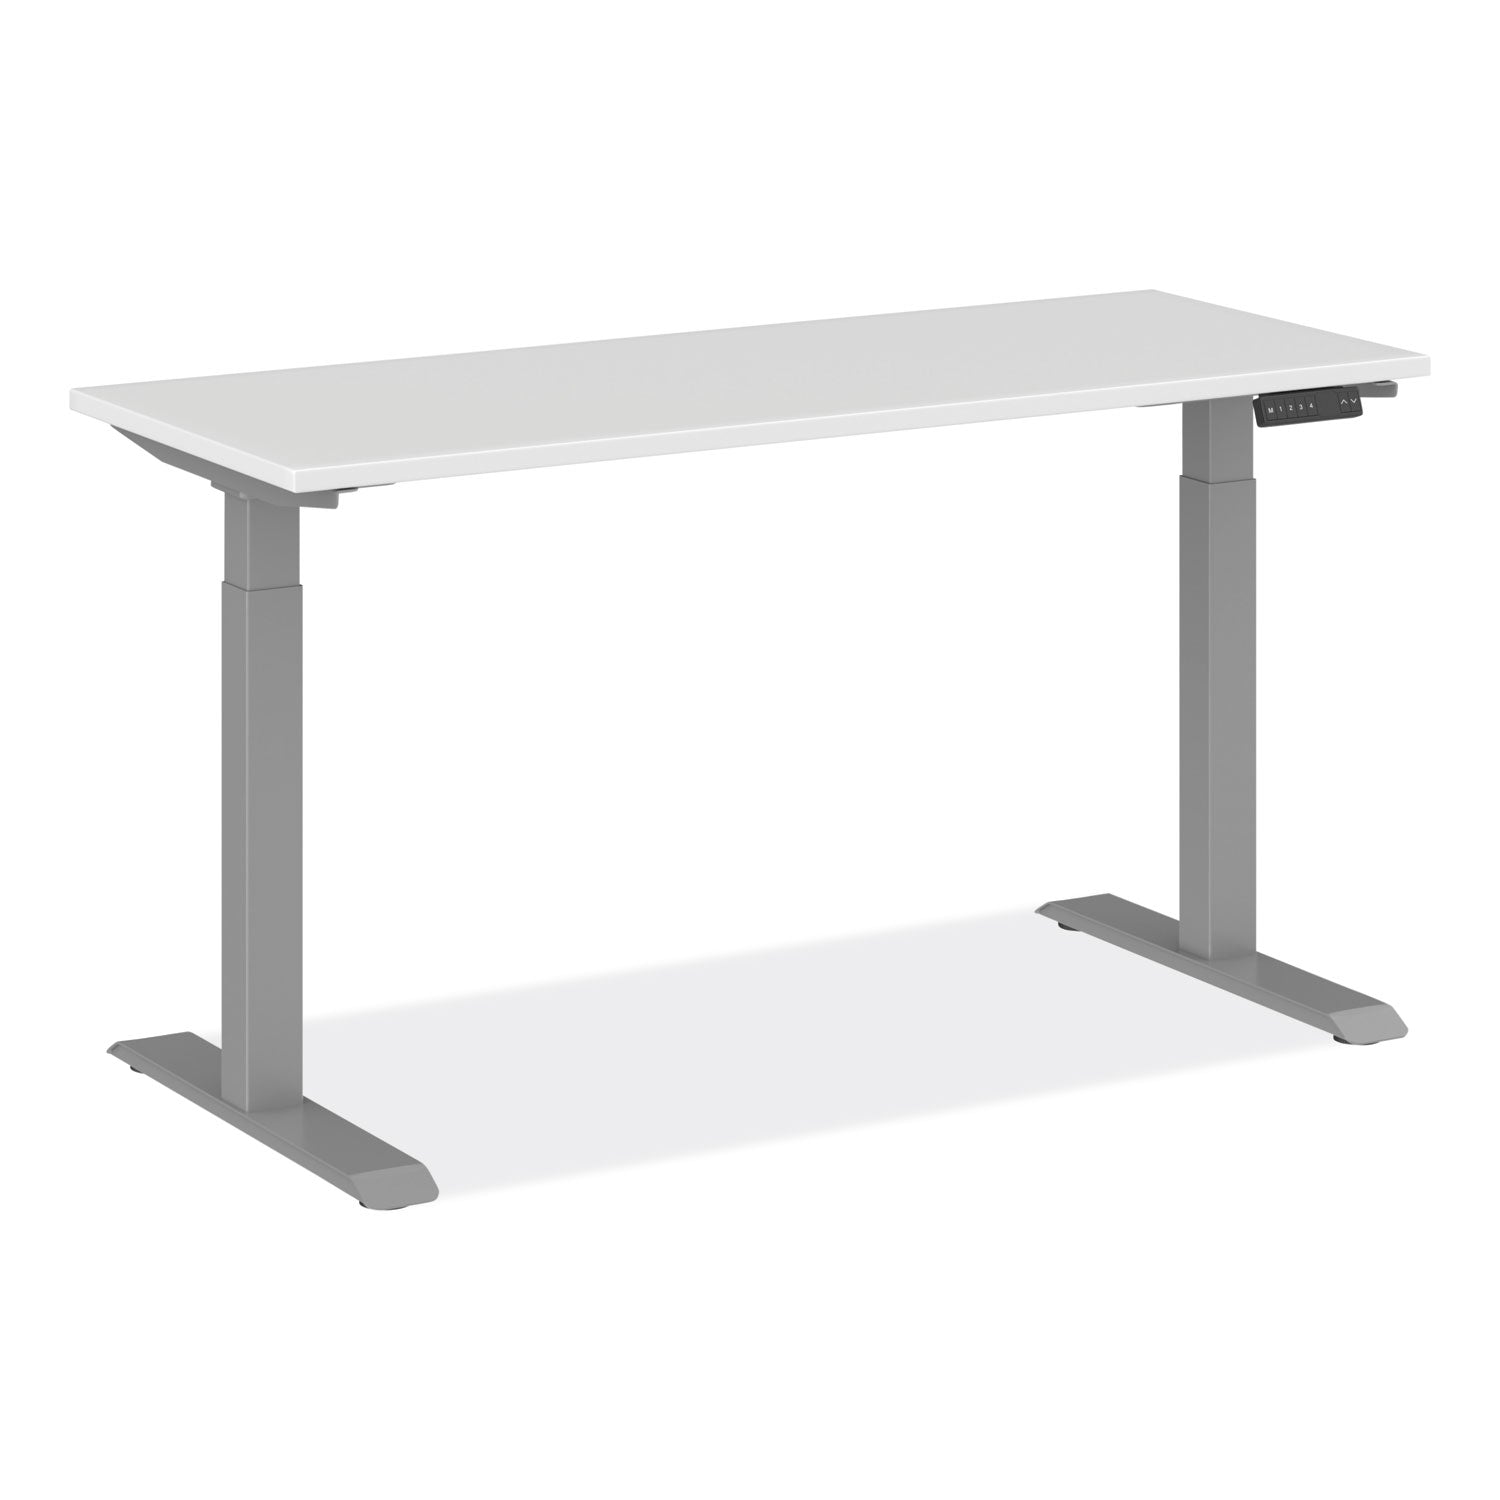 adaptivergo-sit-stand-three-stage-electric-height-adjustable-table-with-memory-controls-60-x-24-x-30-to-49-white_aleht3sagbd - 2